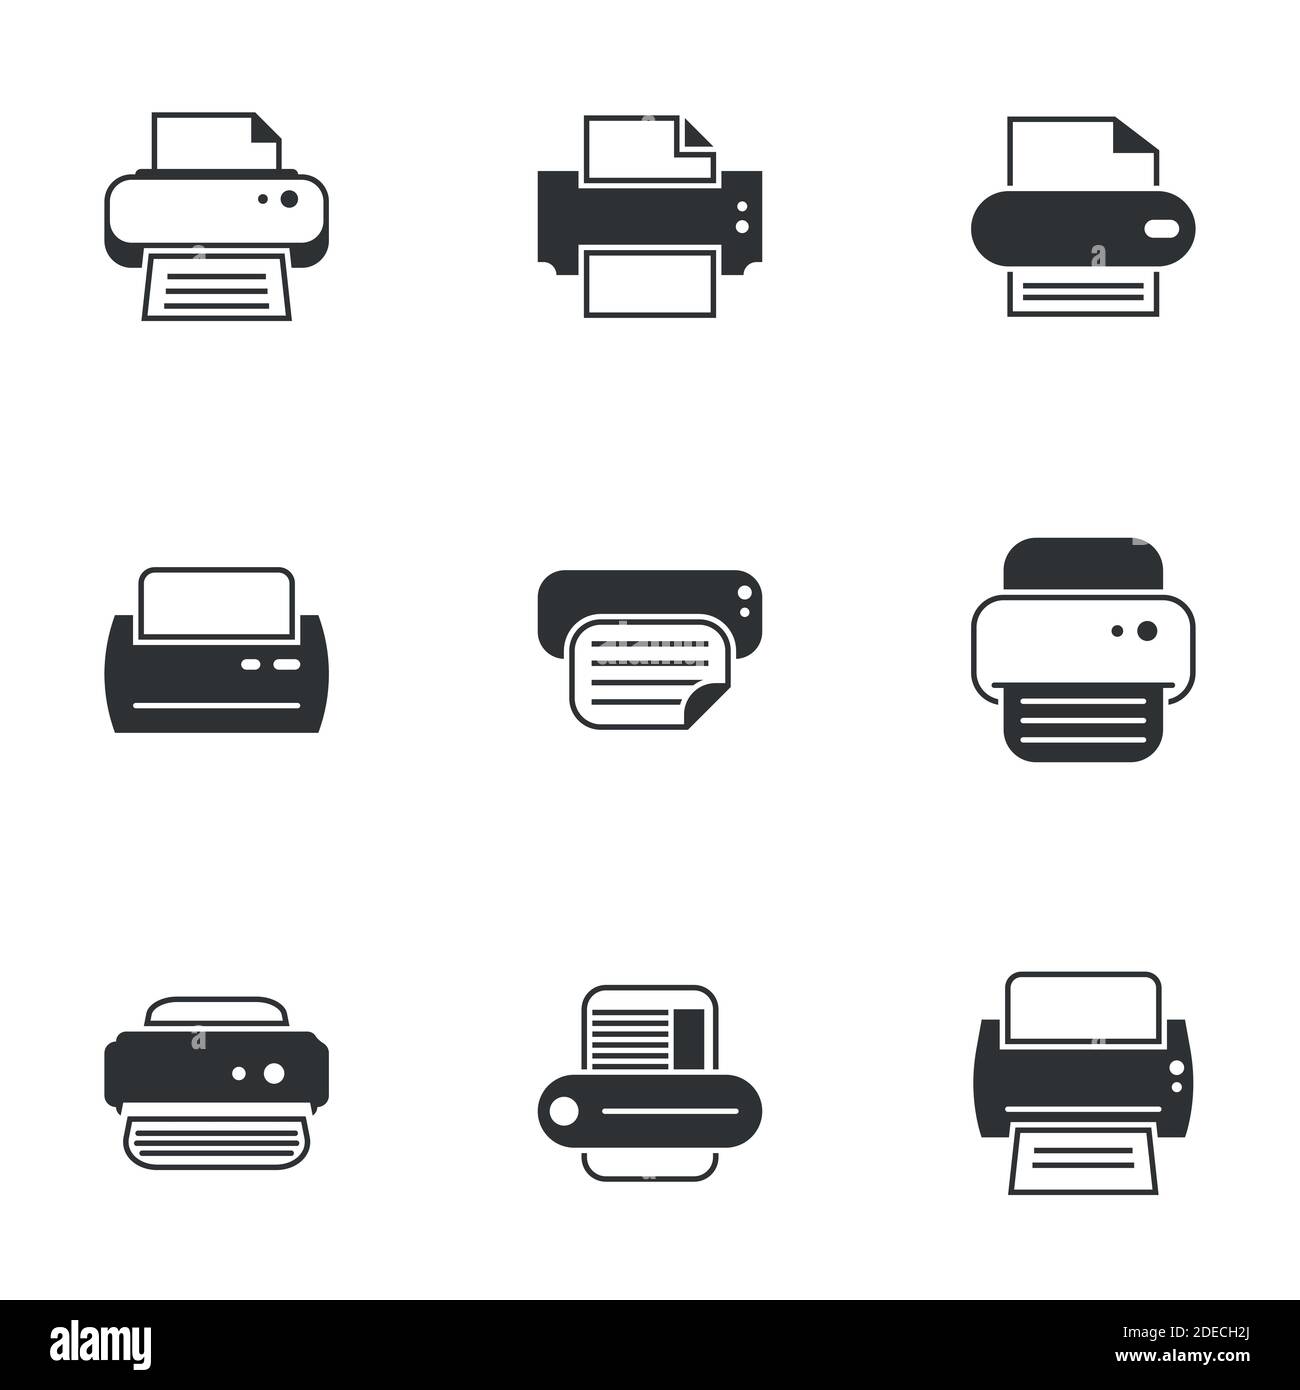 Icons for theme Printer. White background Stock Vector